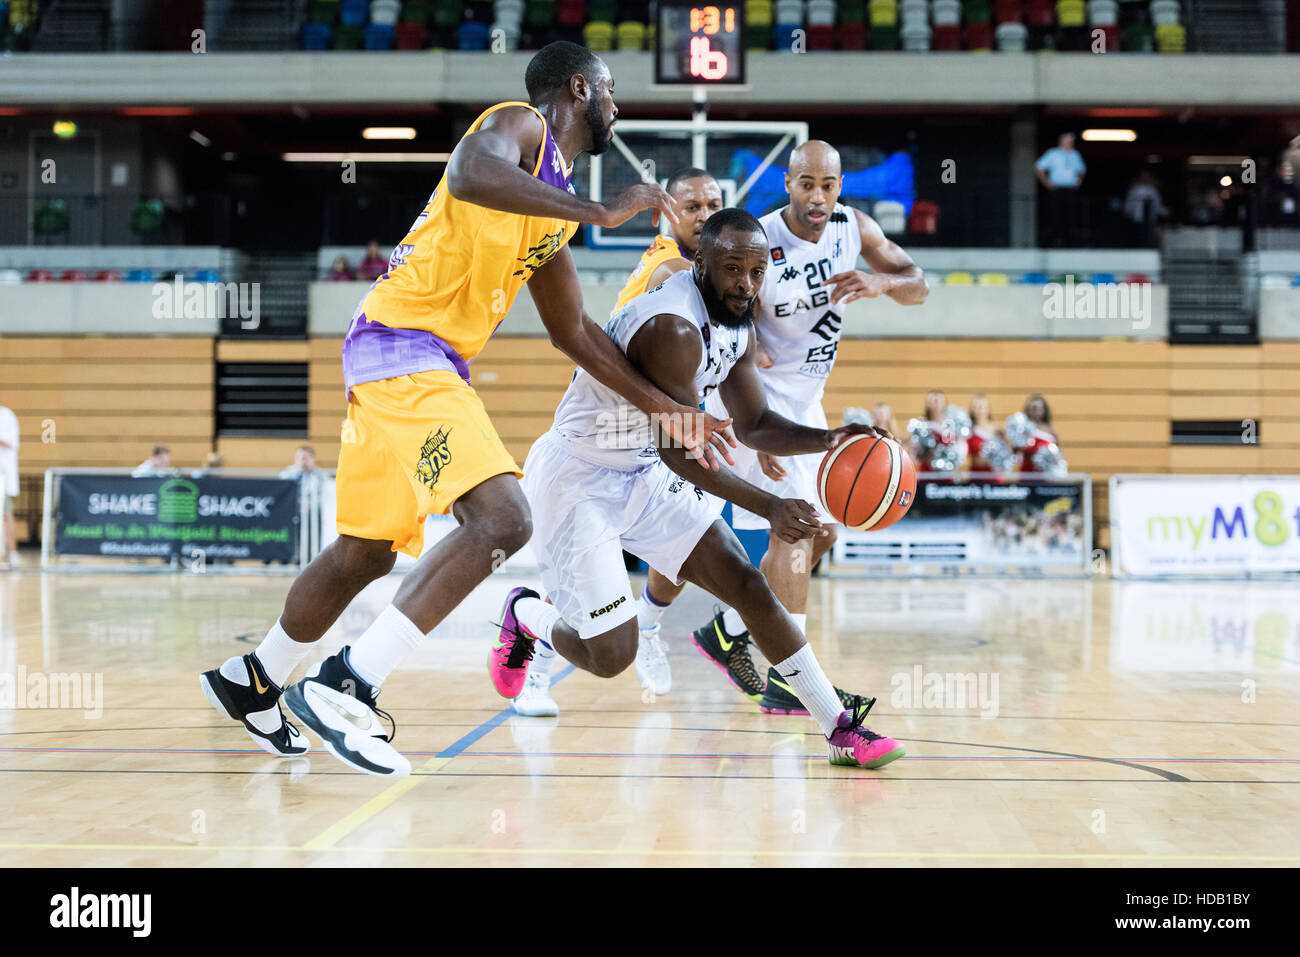 London, UK, 11 December 2016.  Newcastle Eagles beat London Lions 87 vs 80 in an exciting basketball game in the Copper box arena   Credit: pmgimaging/Alamy Live News Stock Photo